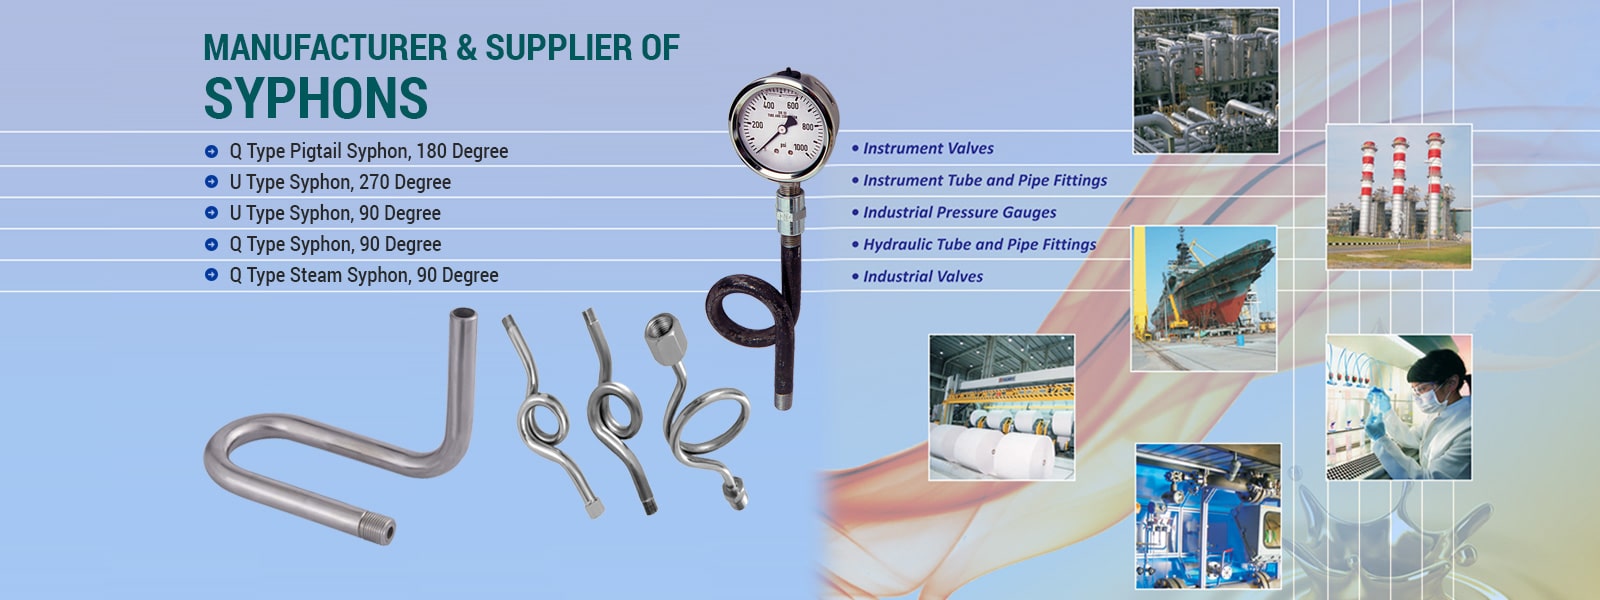 syphon pipe What is Syphon? How to manufacture syphon?